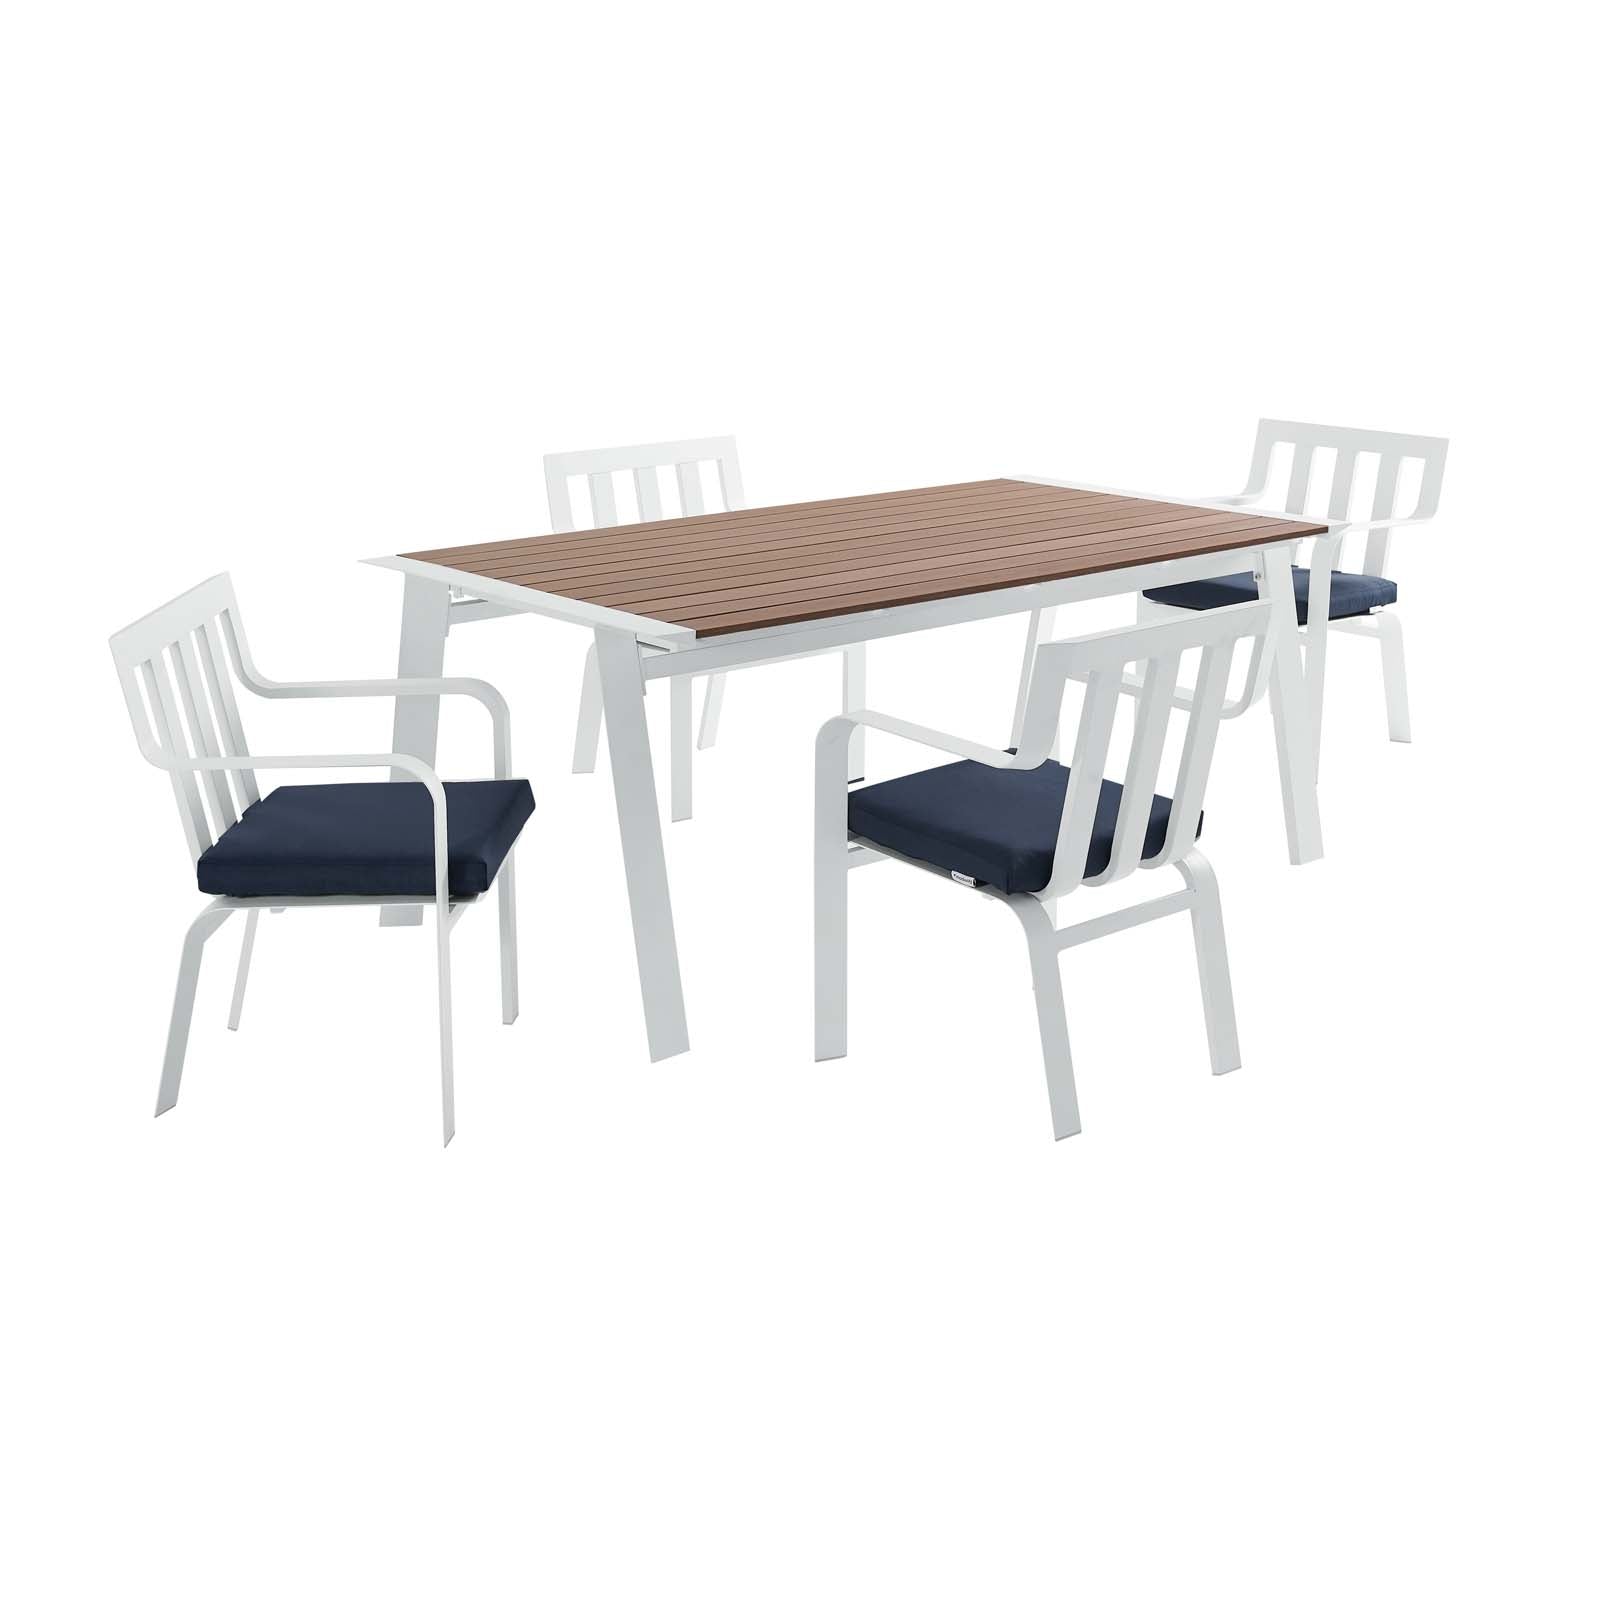 Modway Outdoor Dining Sets - Baxley 5 Piece Outdoor Patio Aluminum Dining Set White Navy